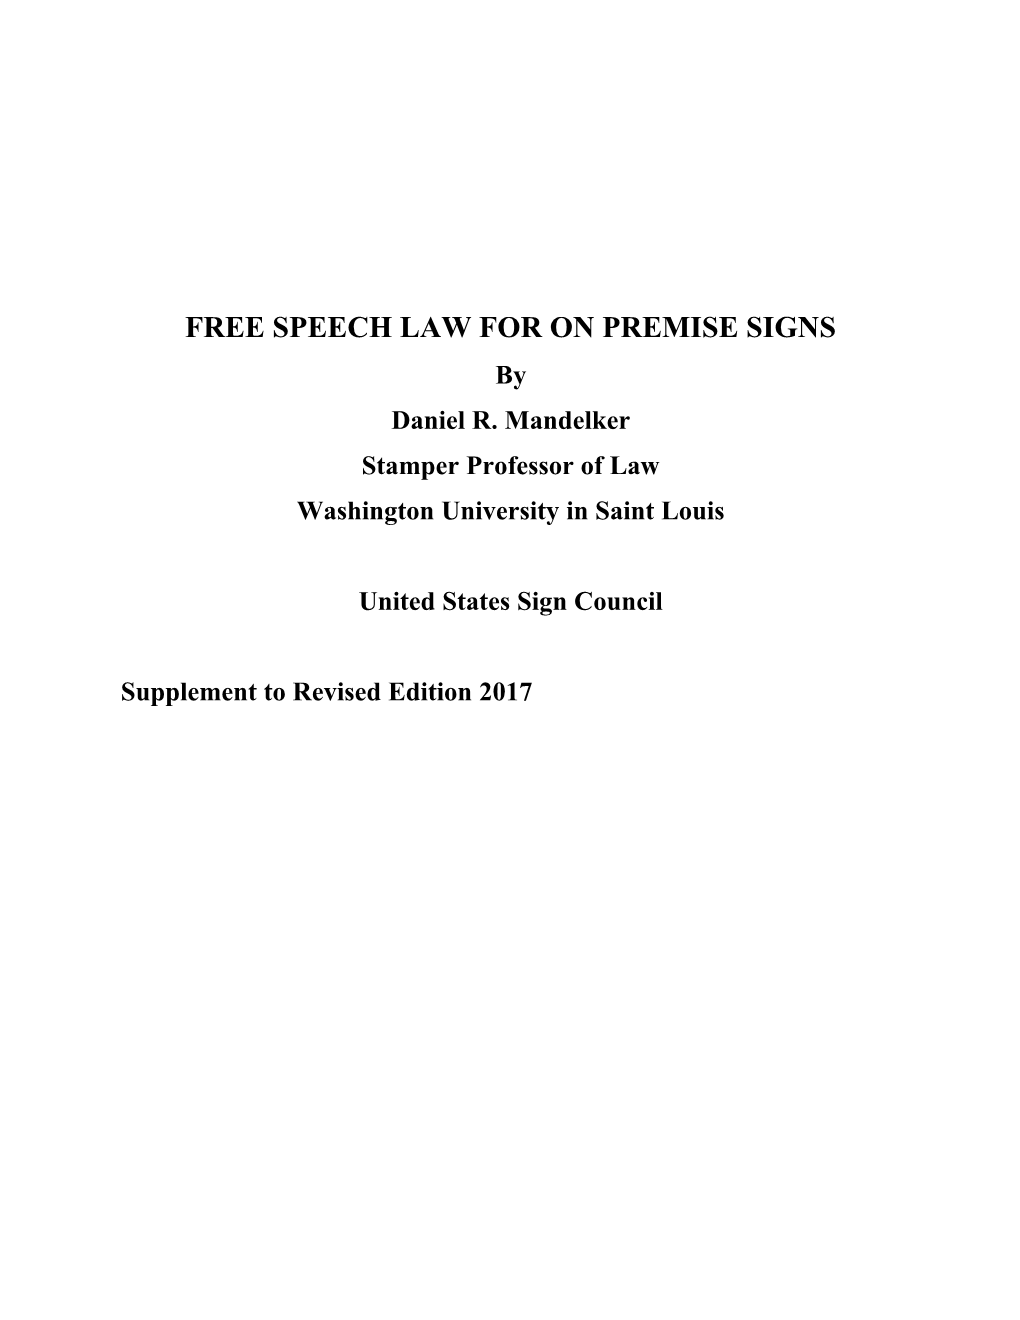 Free Speech Law for on Premise Signs